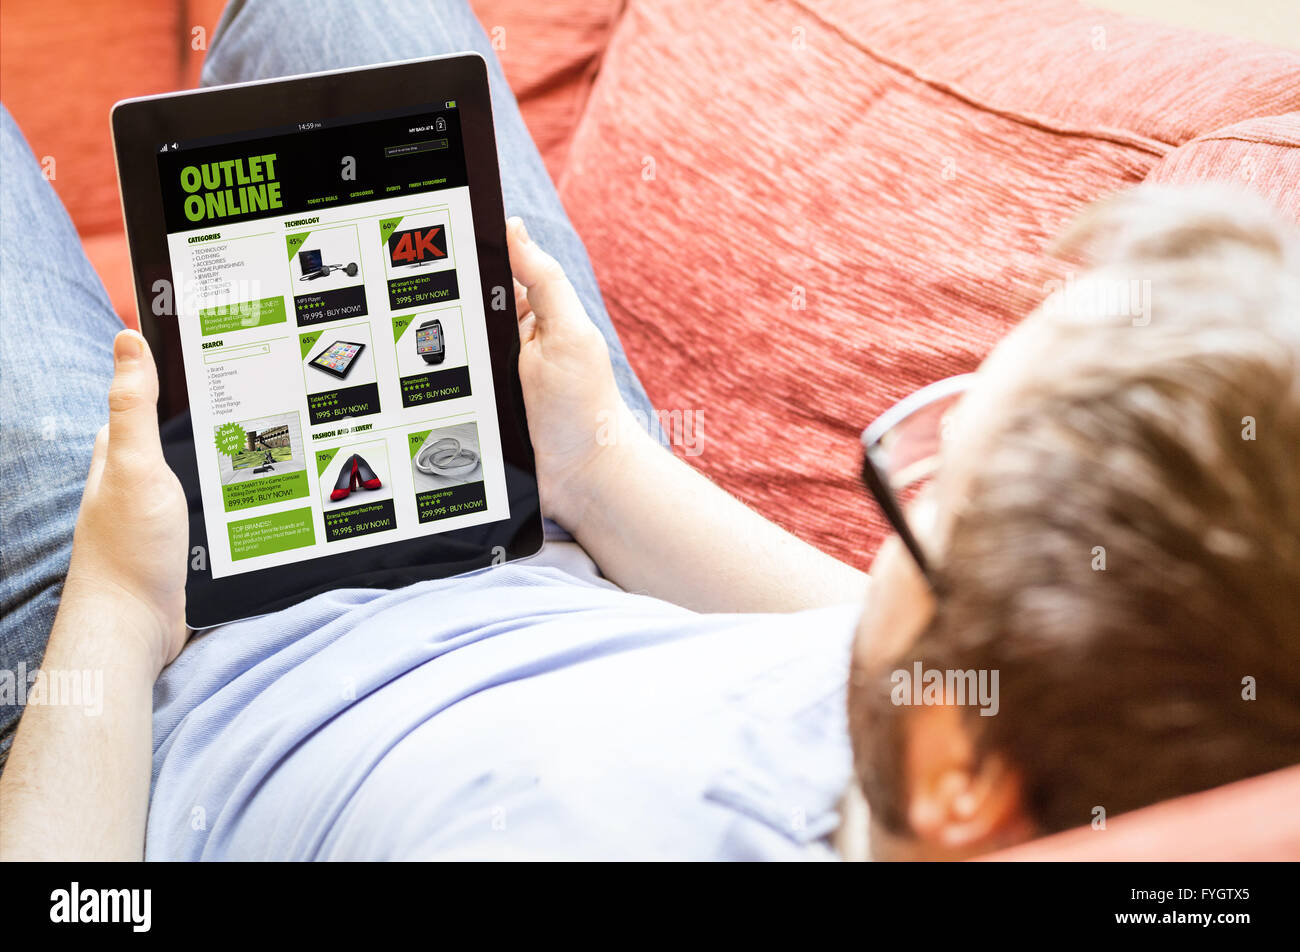 technology lifestyle concept: hipster on the sofa with online outlet shop tablet. Screen graphics are made up. Stock Photo